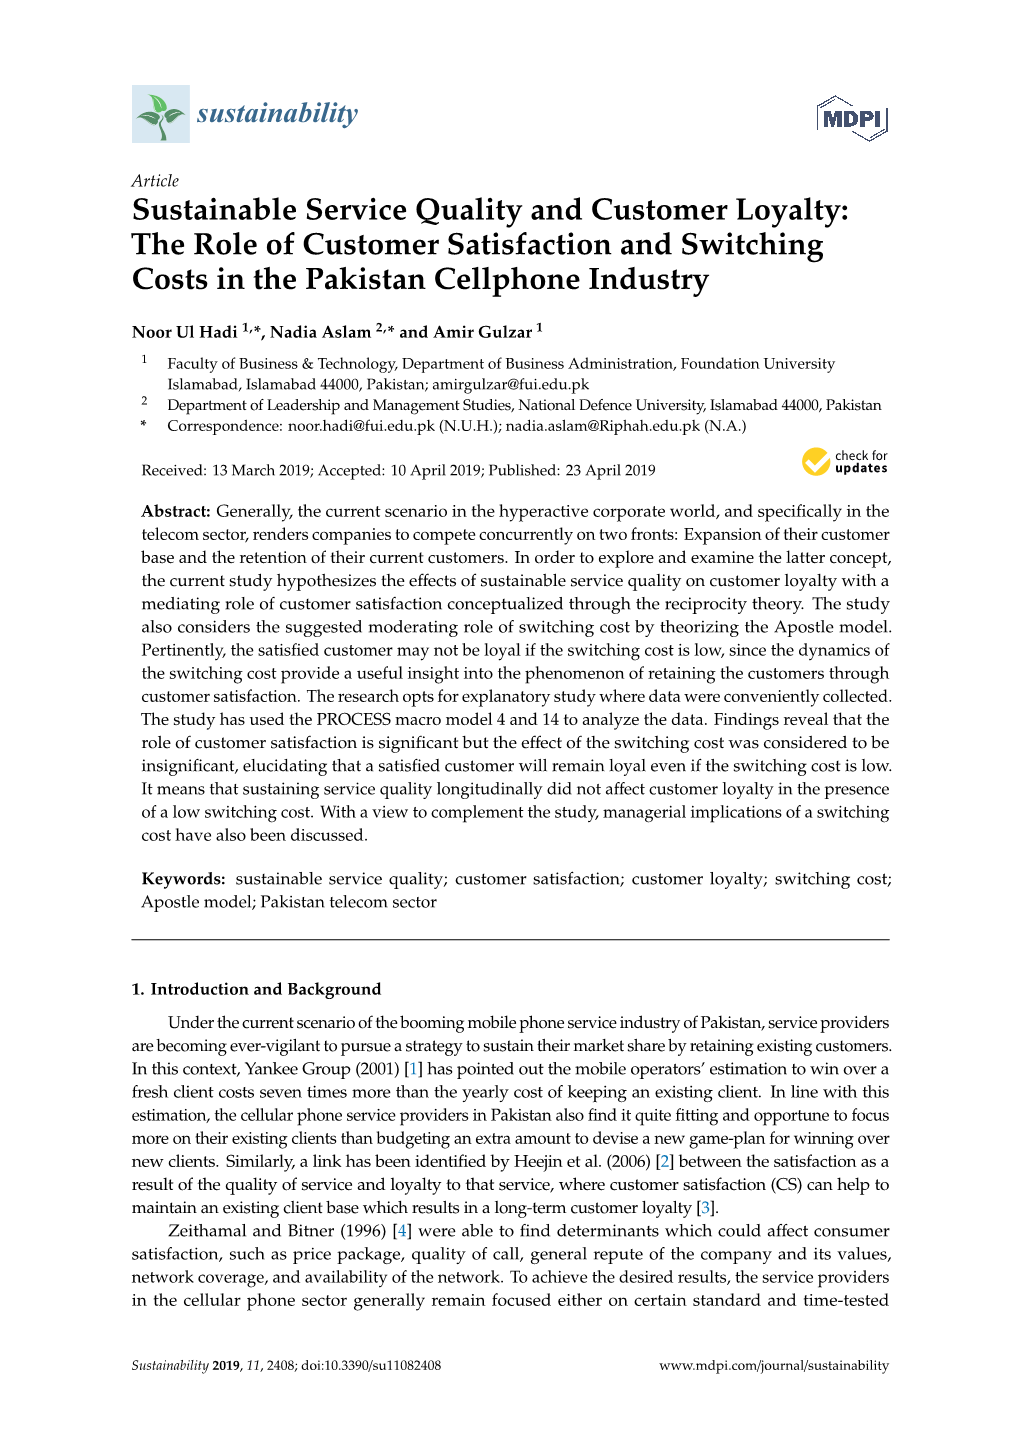 Sustainable Service Quality and Customer Loyalty: the Role of Customer Satisfaction and Switching Costs in the Pakistan Cellphone Industry